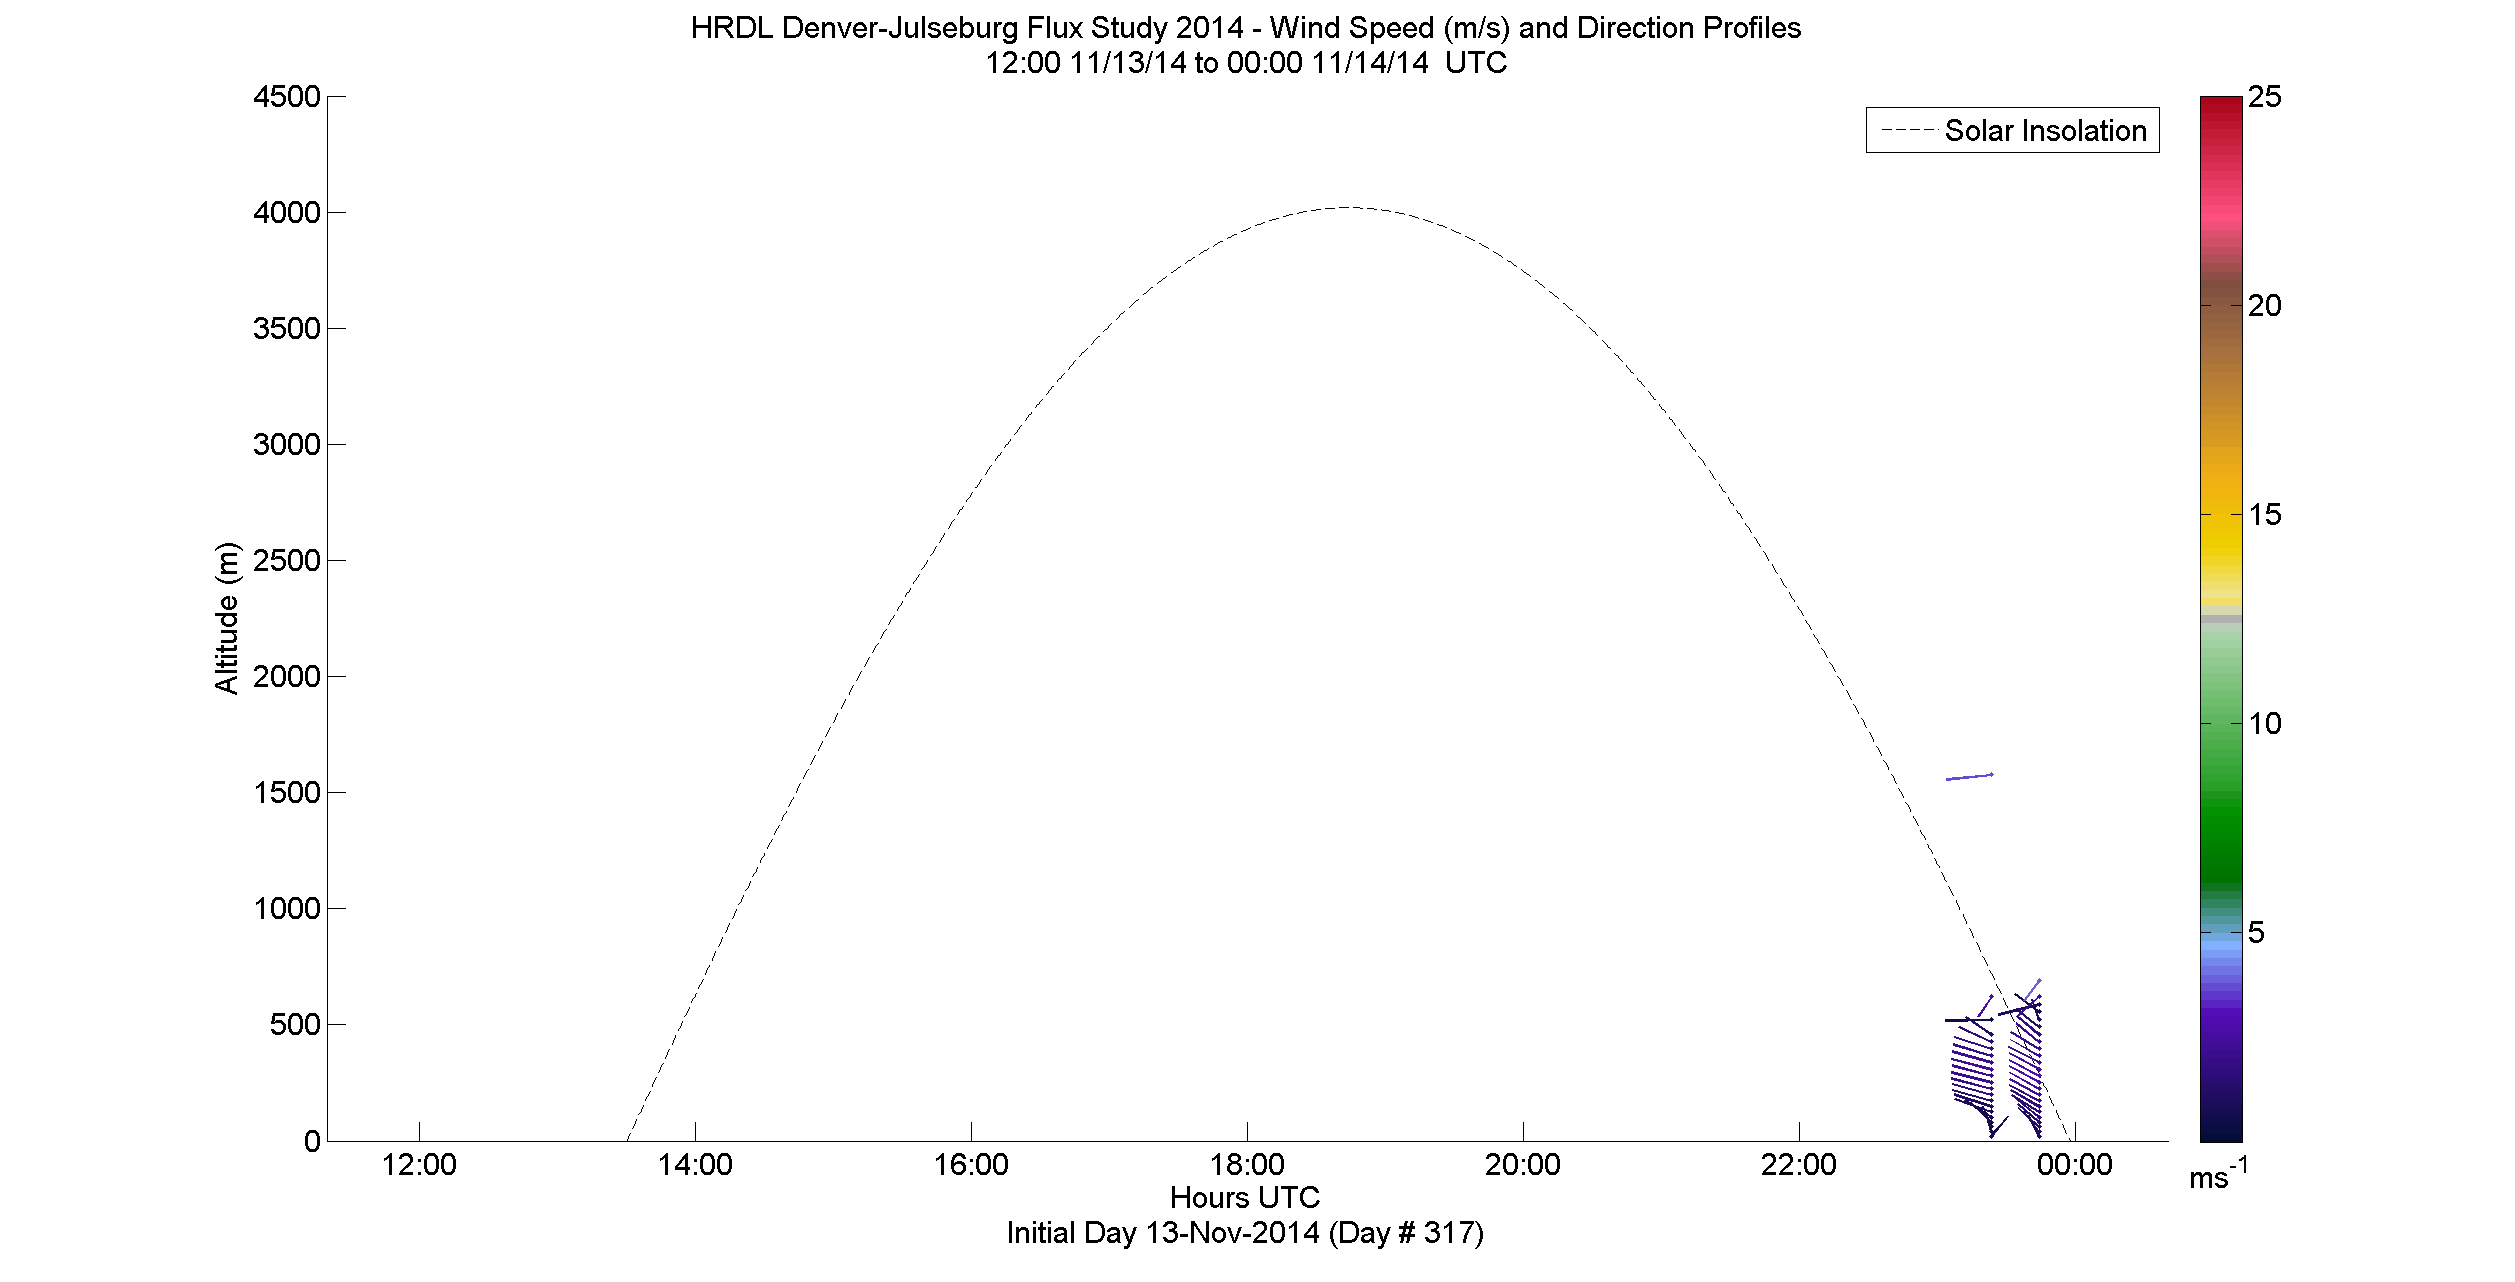 HRDL speed and direction profile - November 13 pm